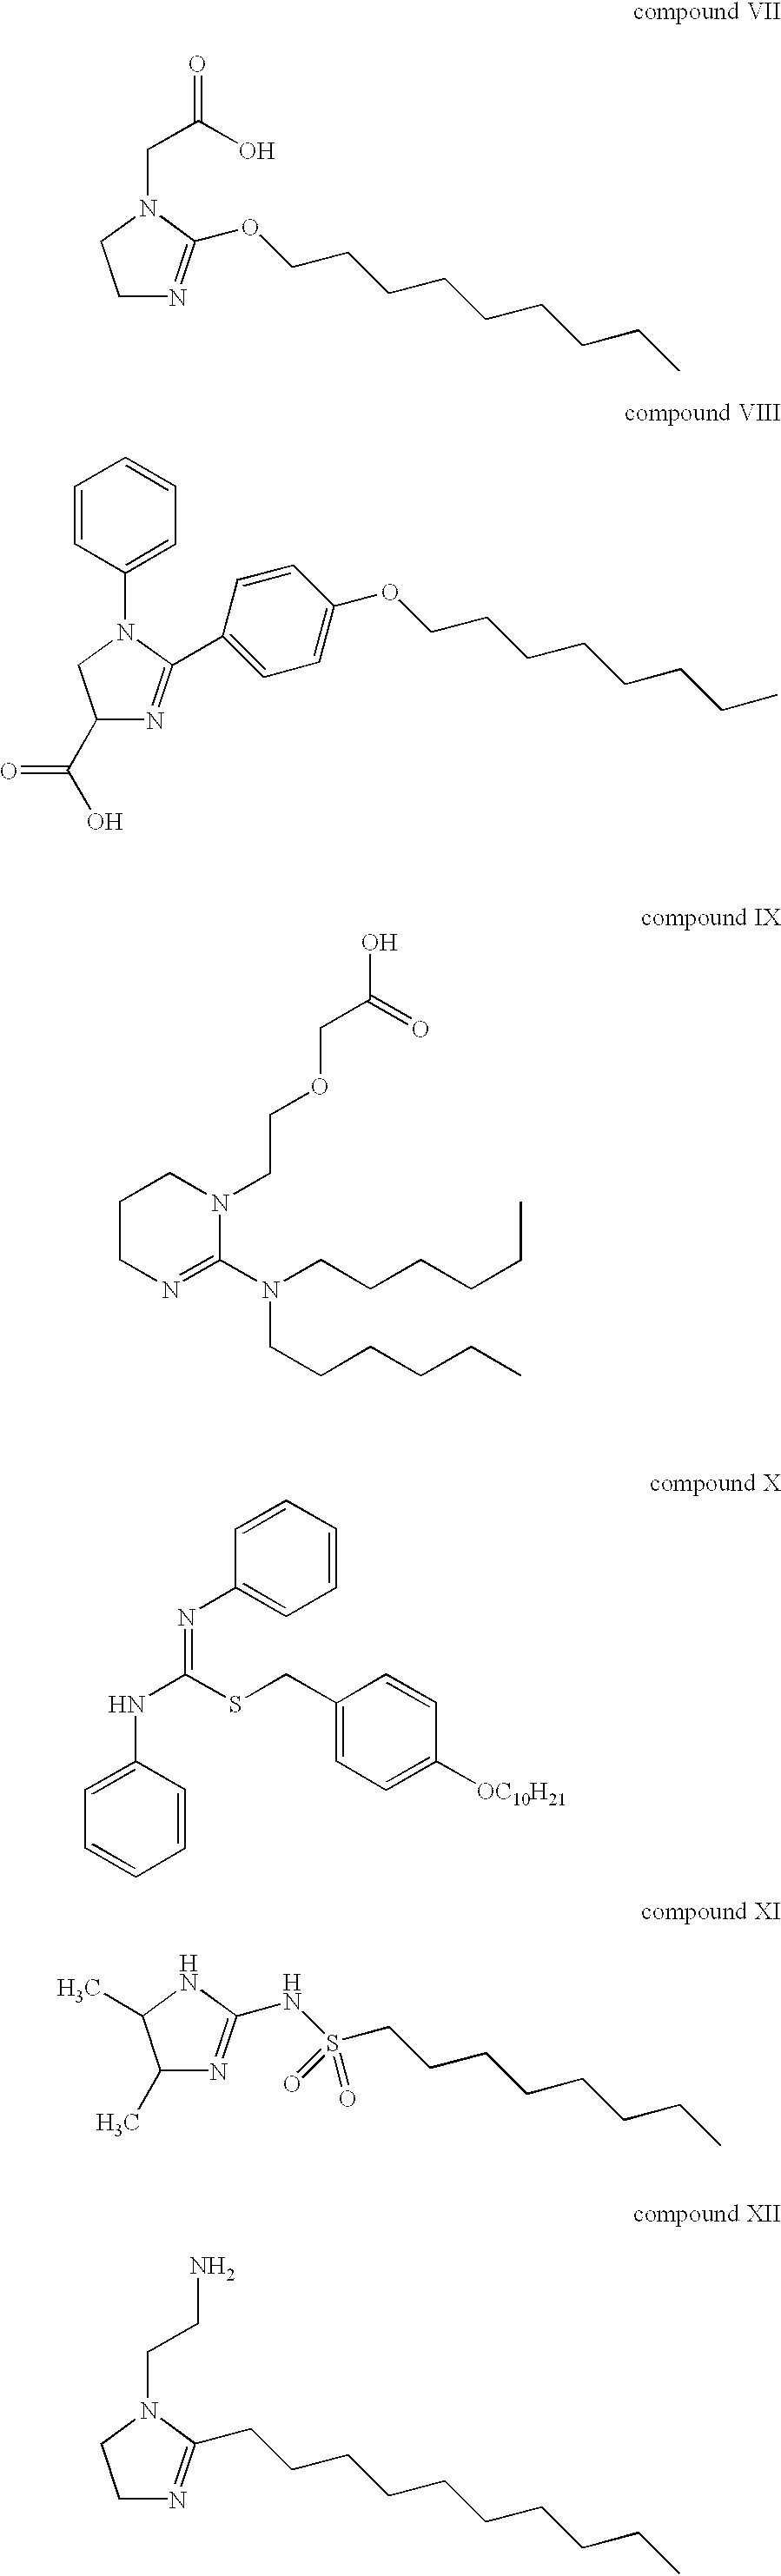 Preparation of lithographic printing plate by computer-to-plate by ink jet method utilizing amidine-containing oleophilizing compound